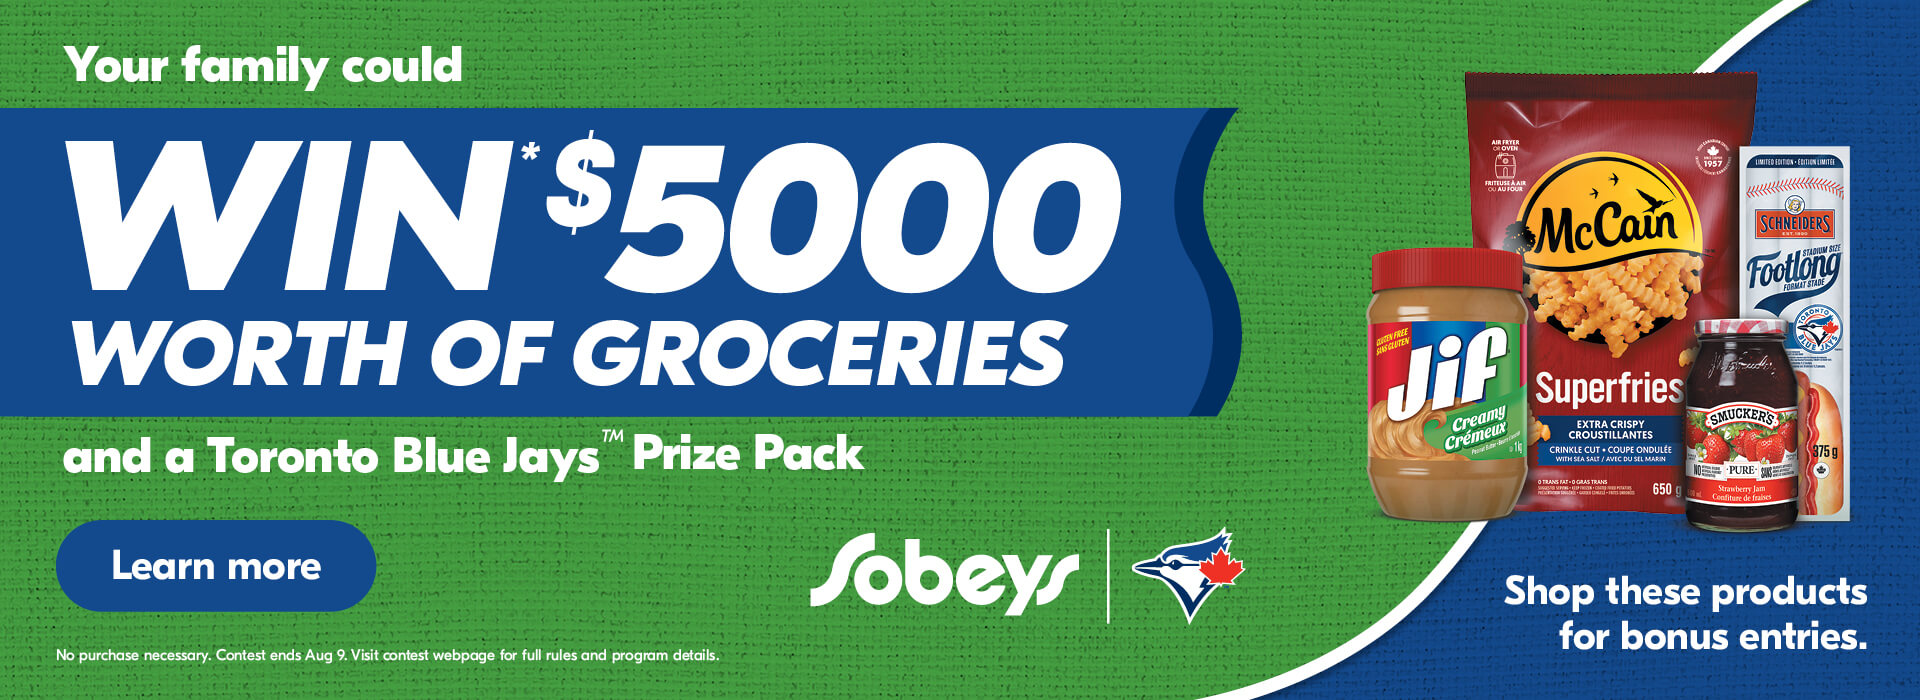 Your family could win $5000 worth of groceries and a Toronto Blue Jays prize pack